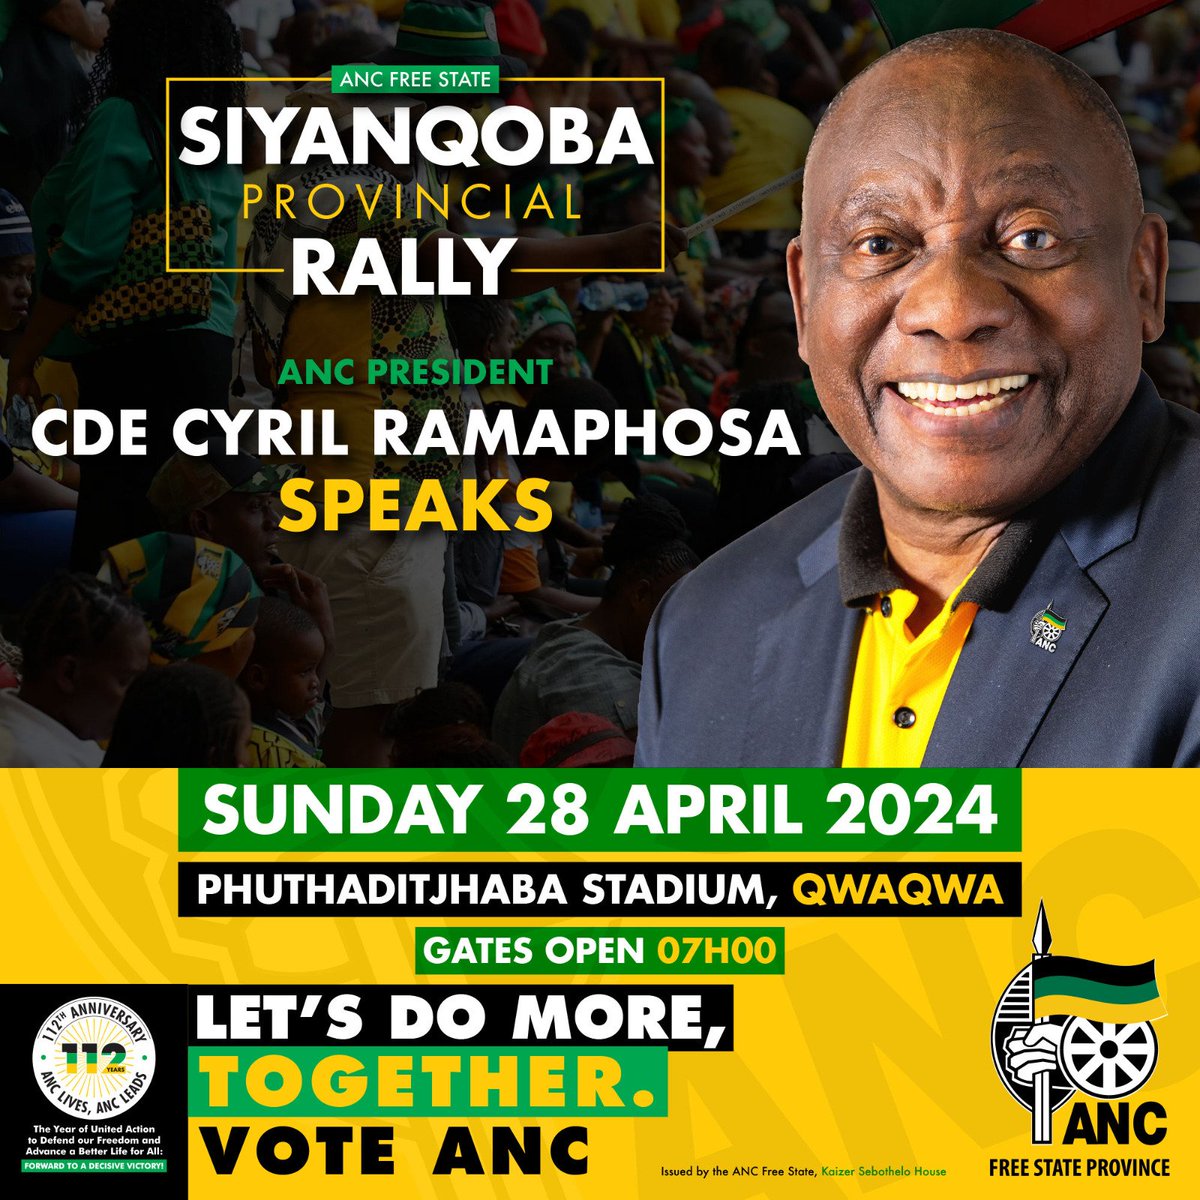 ANC President Cde Cyril Ramaphosa speaks at the Free State Siyanqoba Rally. 

The ANC FS will host the Siyanqoba Rally in Phuthaditjhaba Stadium, Qwaqwa. 
@ANCFS
@MYANC
#firstballotvoteANC
#secondballotvoteANC
#thridballotvoteANC